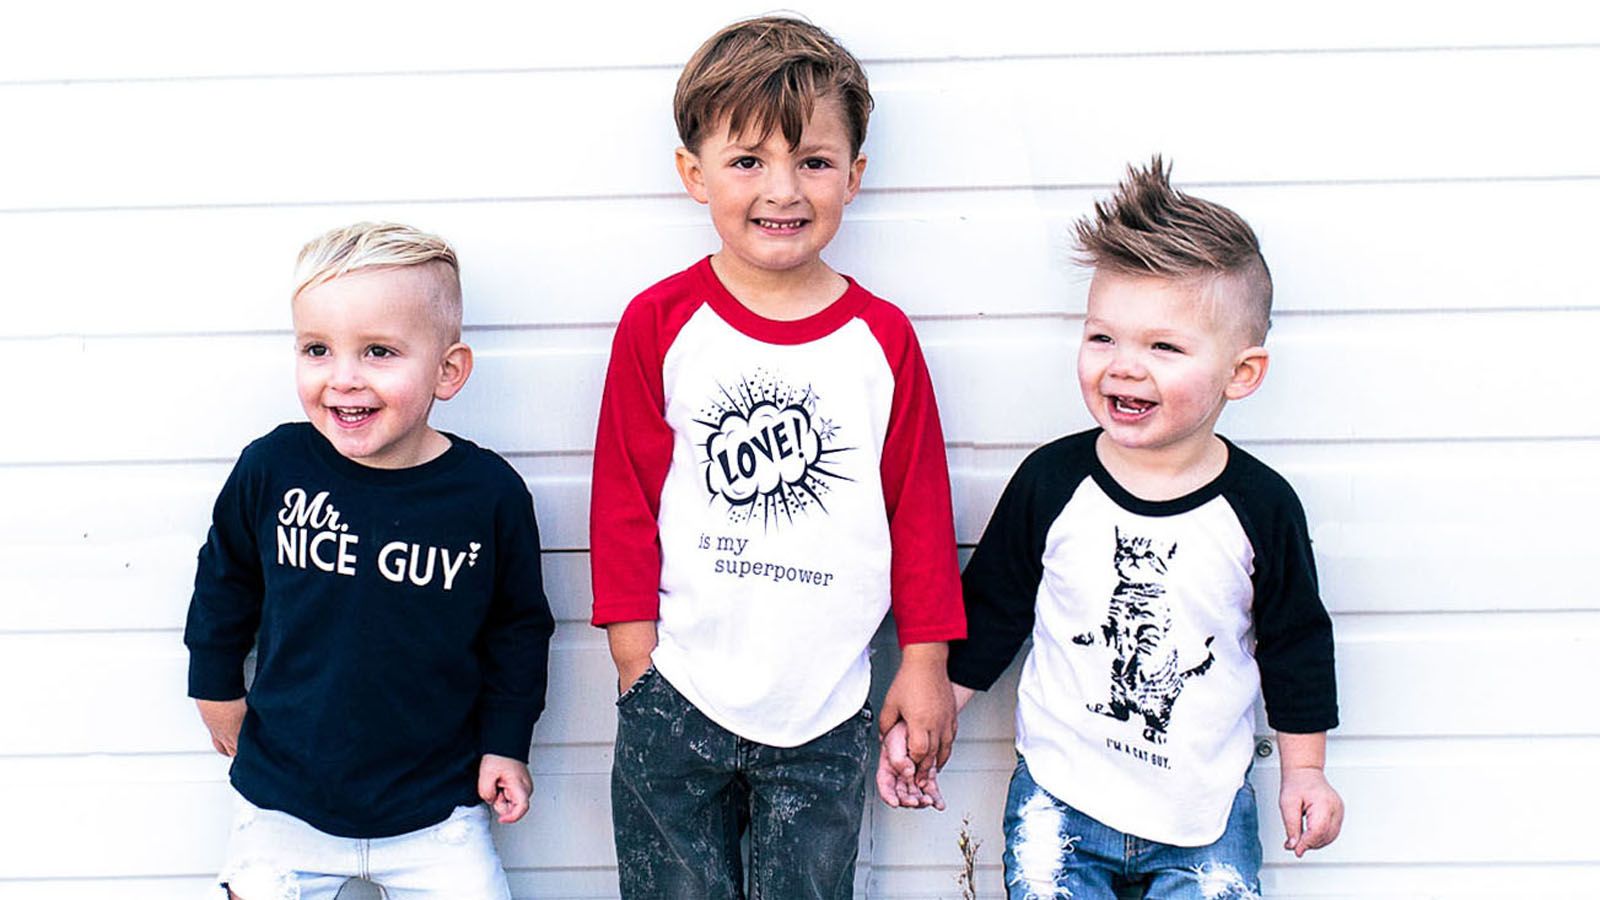 Clothing for boys that smashes gender stereotypes